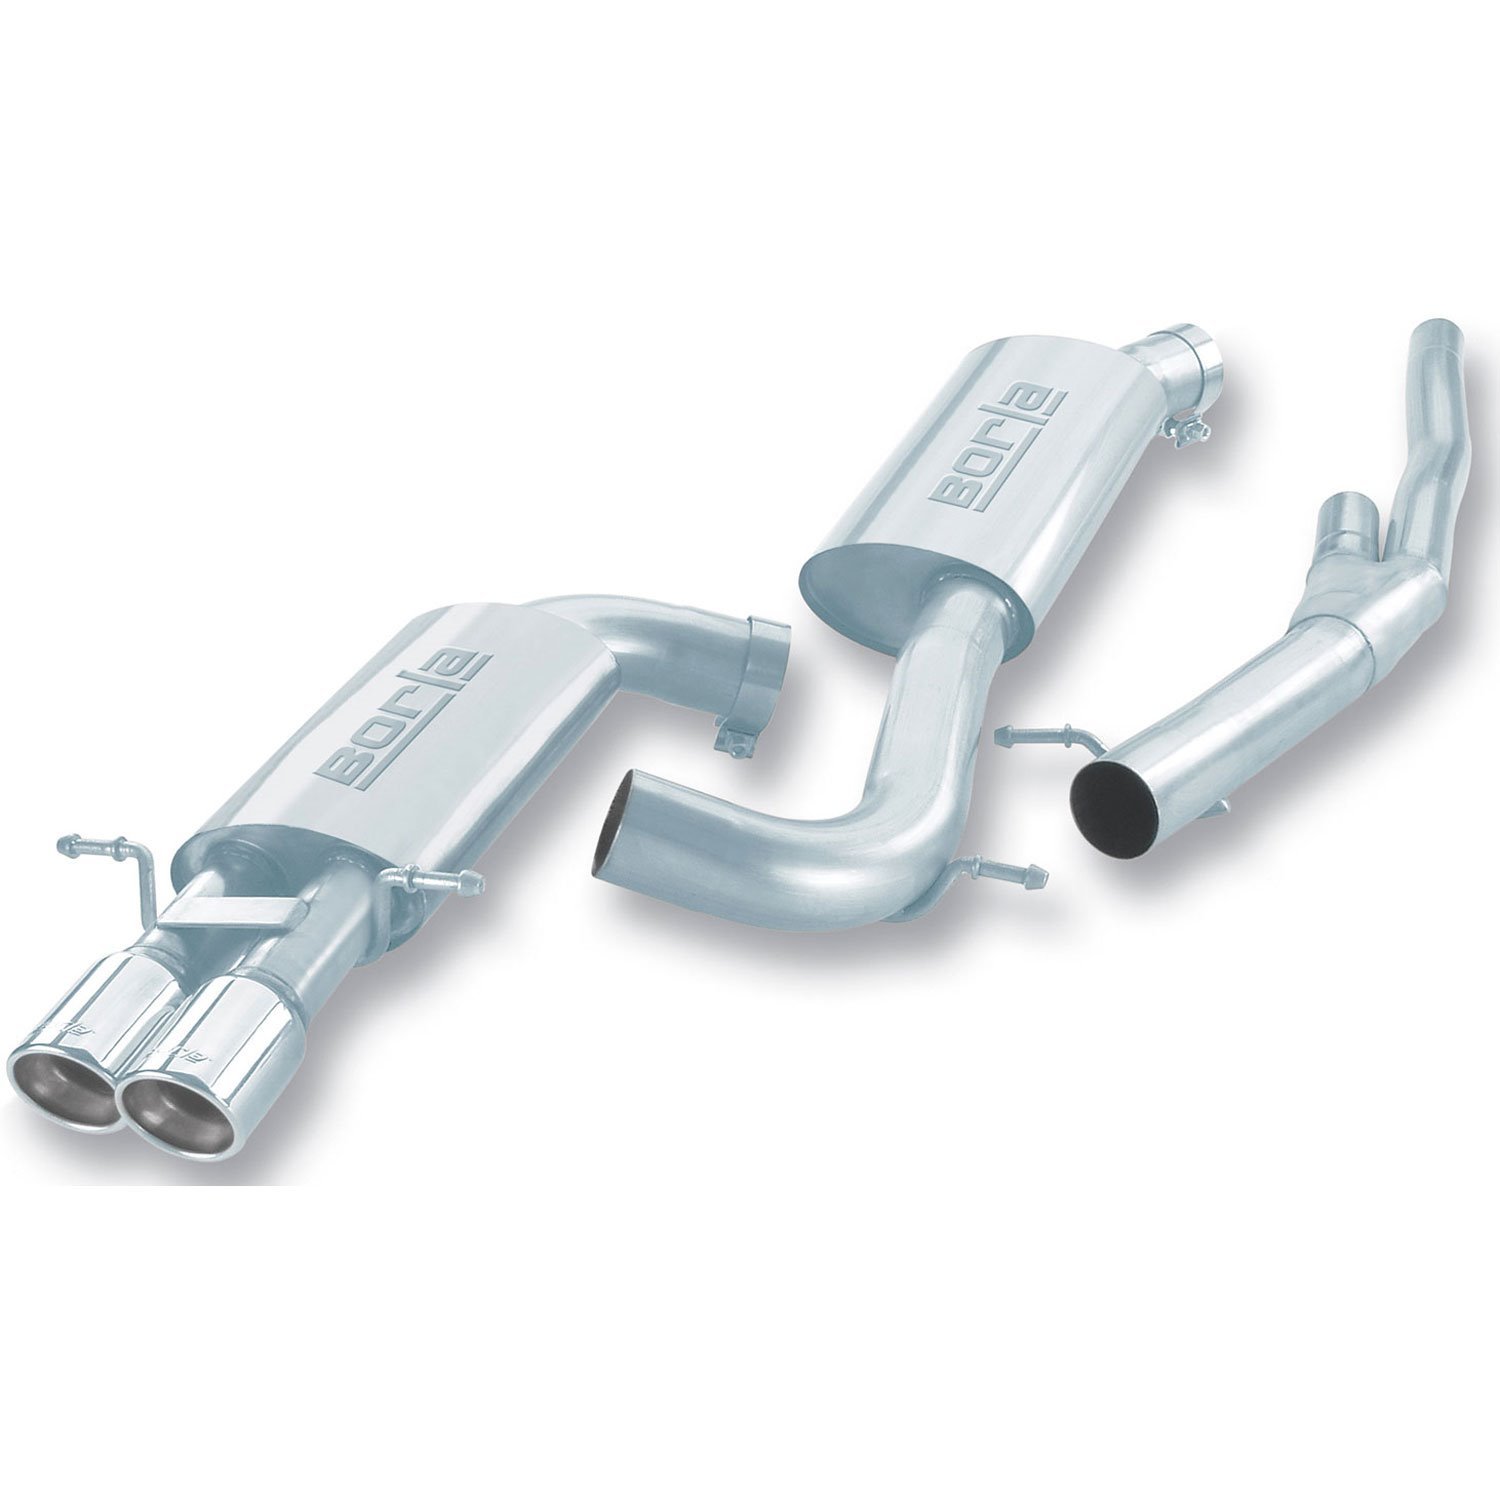 Cat-Back Exhaust System 2000-02 Audi S4 Twin Turbo V6